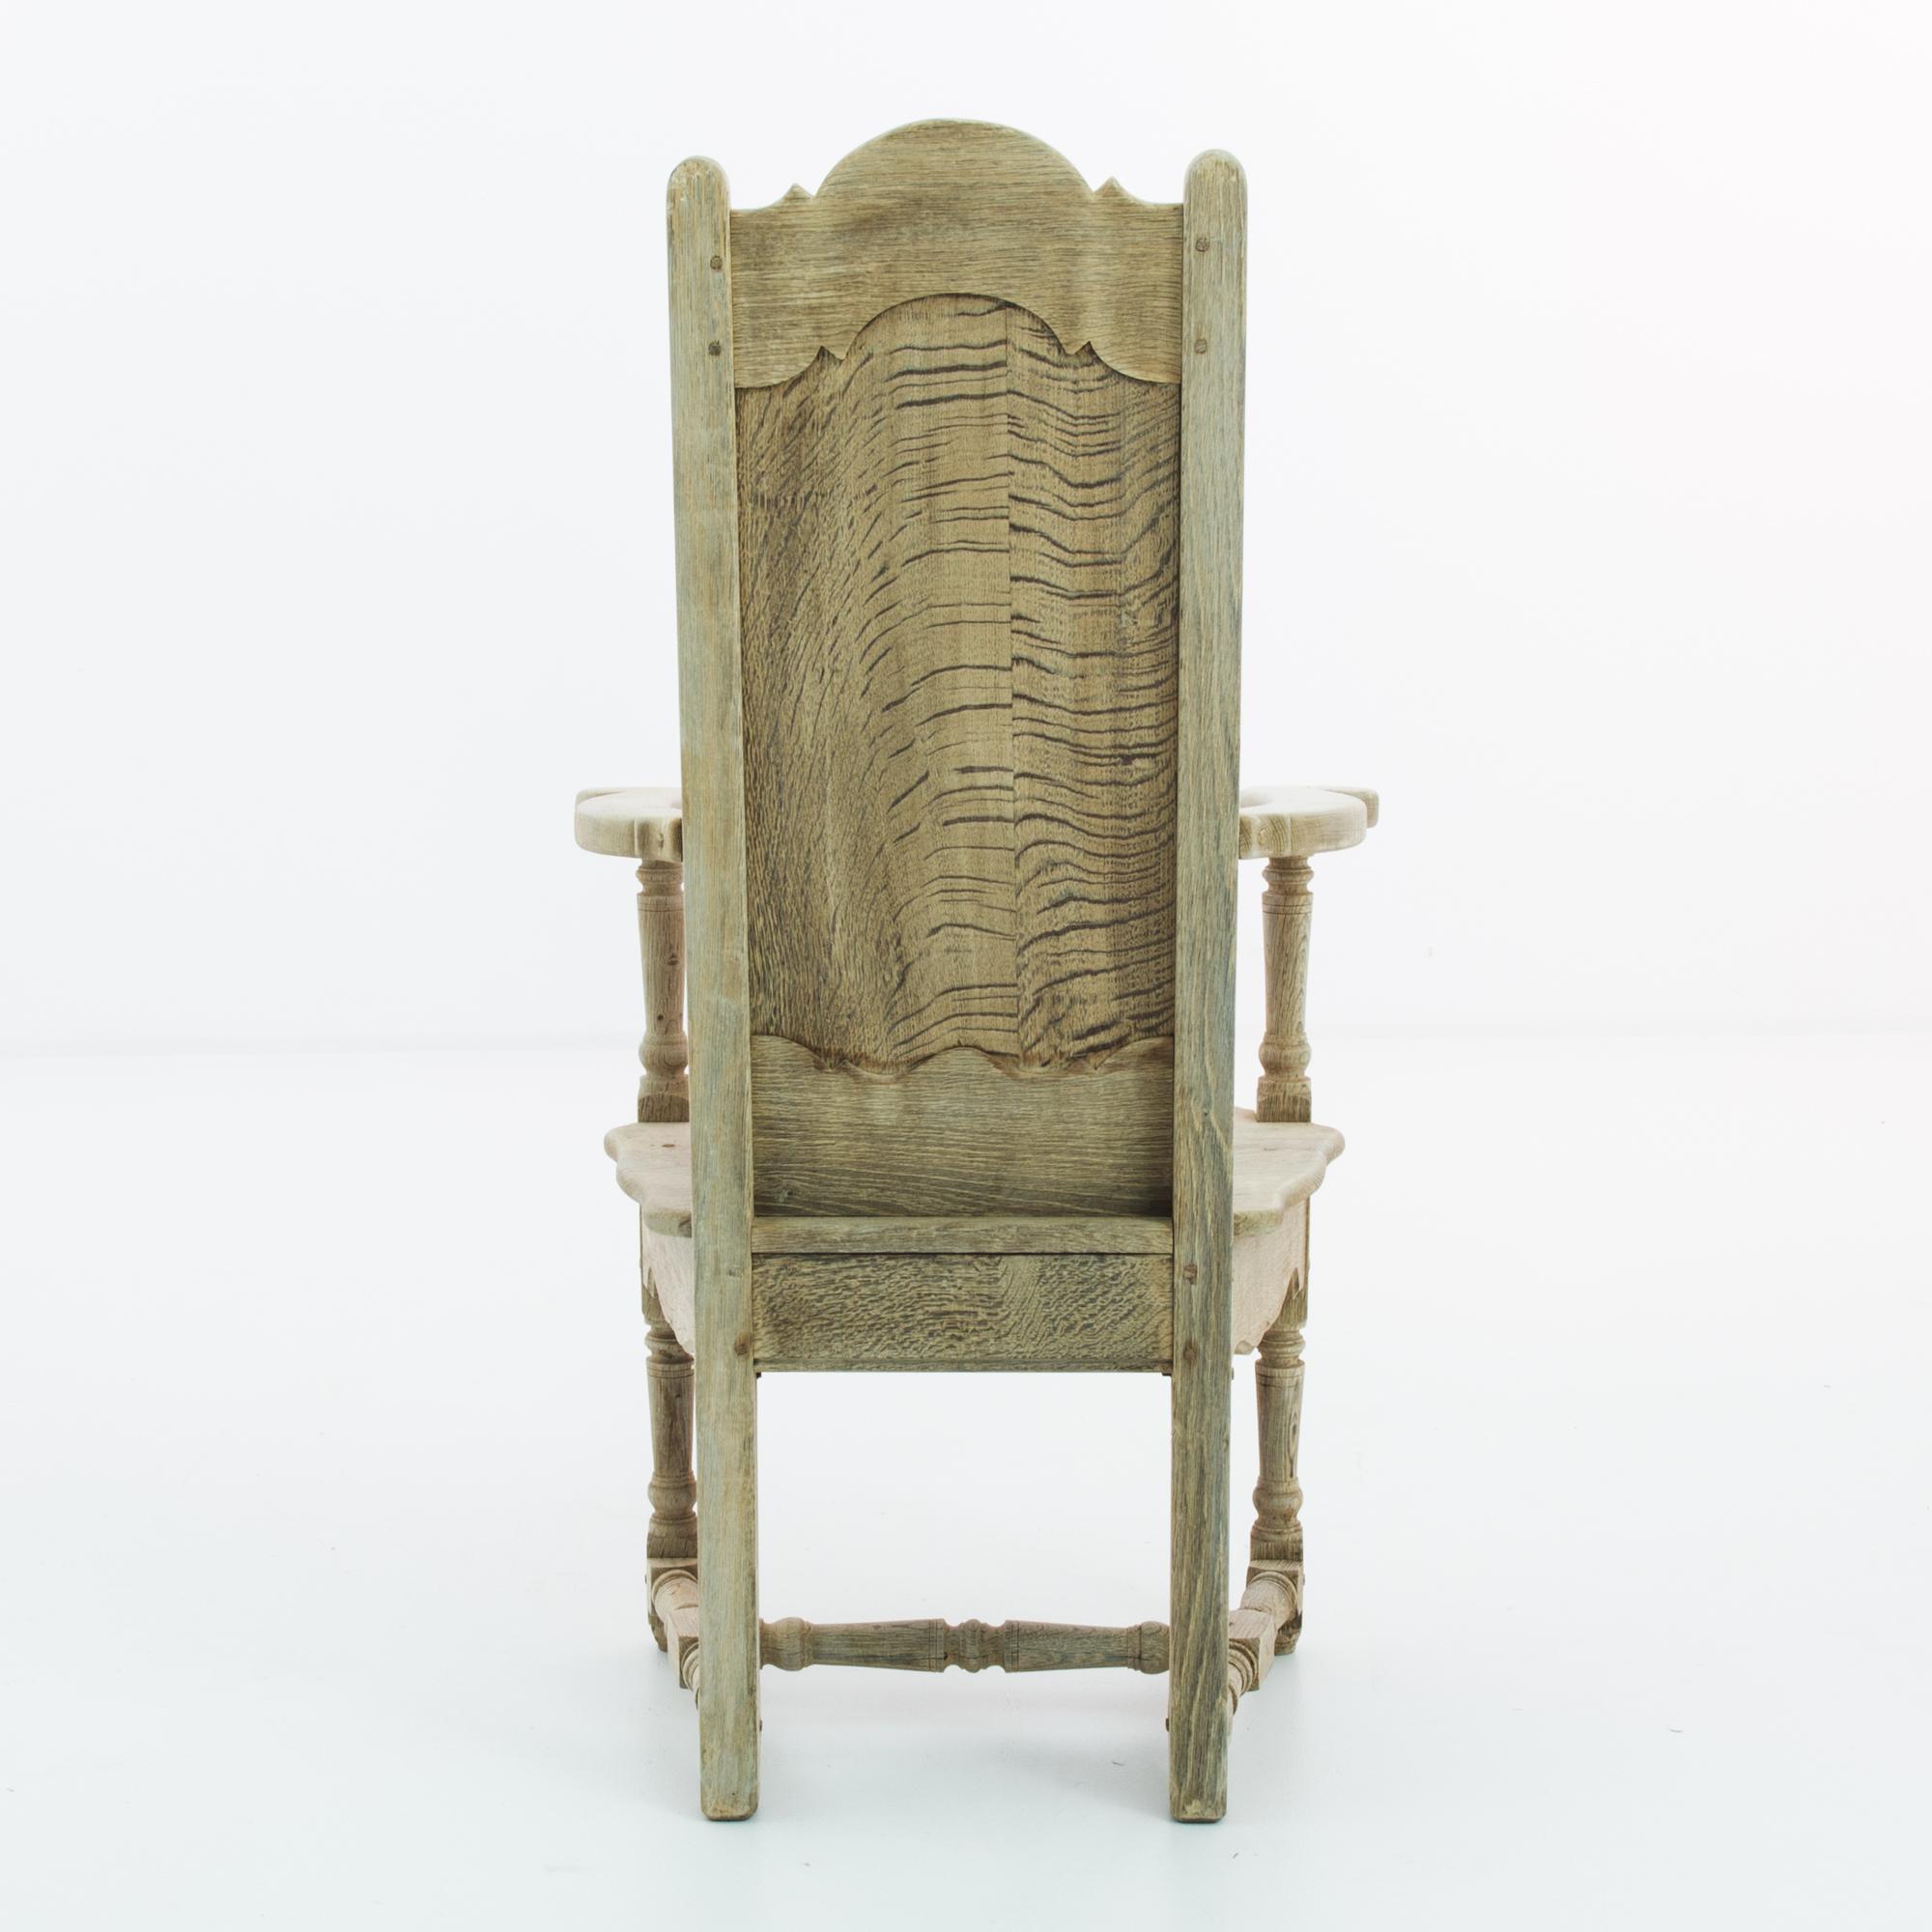 Made in France, this bleached oak armchair offers old-world charm with its elaborate carvings. The apron and back are carved with a lattice, while refined paneling features on the center of the backrest. Contoured armrests and turned legs give this